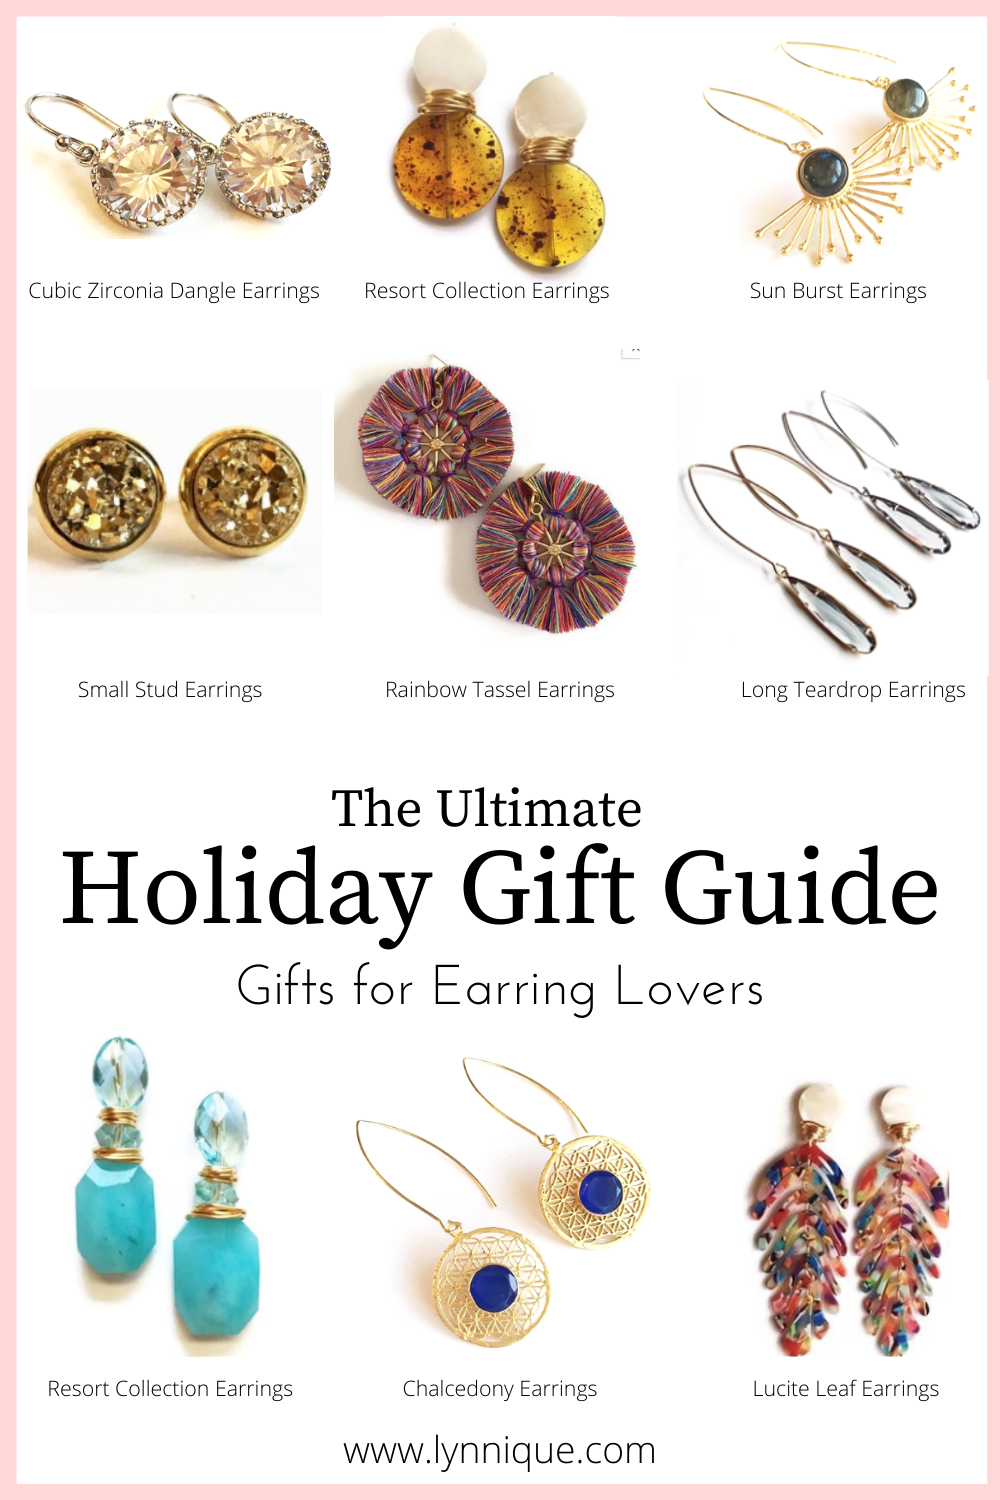 THE ULTIMATE HOLIDAY GIFT GUIDE - GIFTS FOR EARRING LOVERS